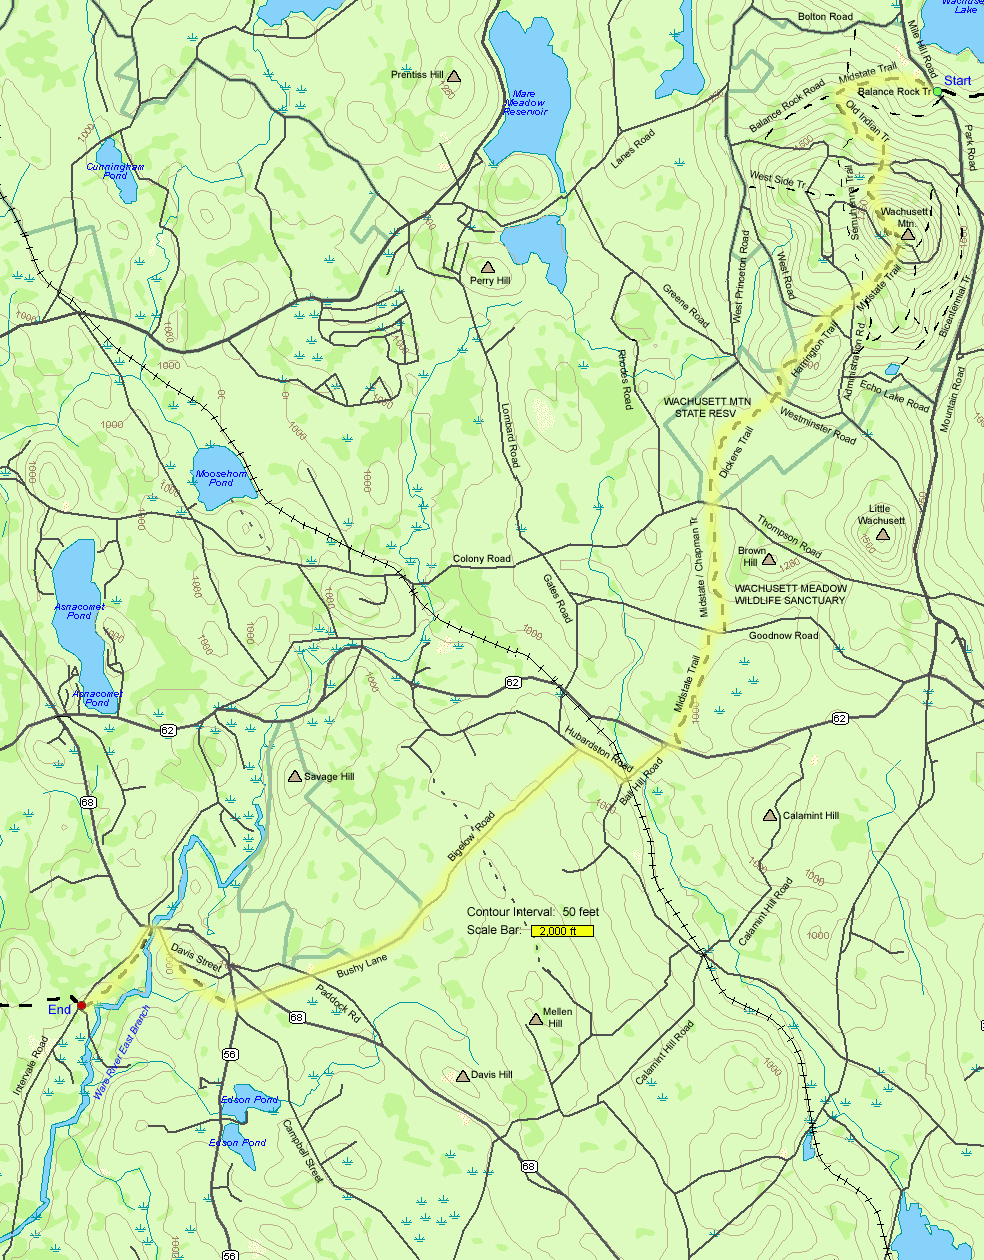 Map of hike route on the Midstate Trail from Mt. Wachusett to Rutland (map by Webmaster)